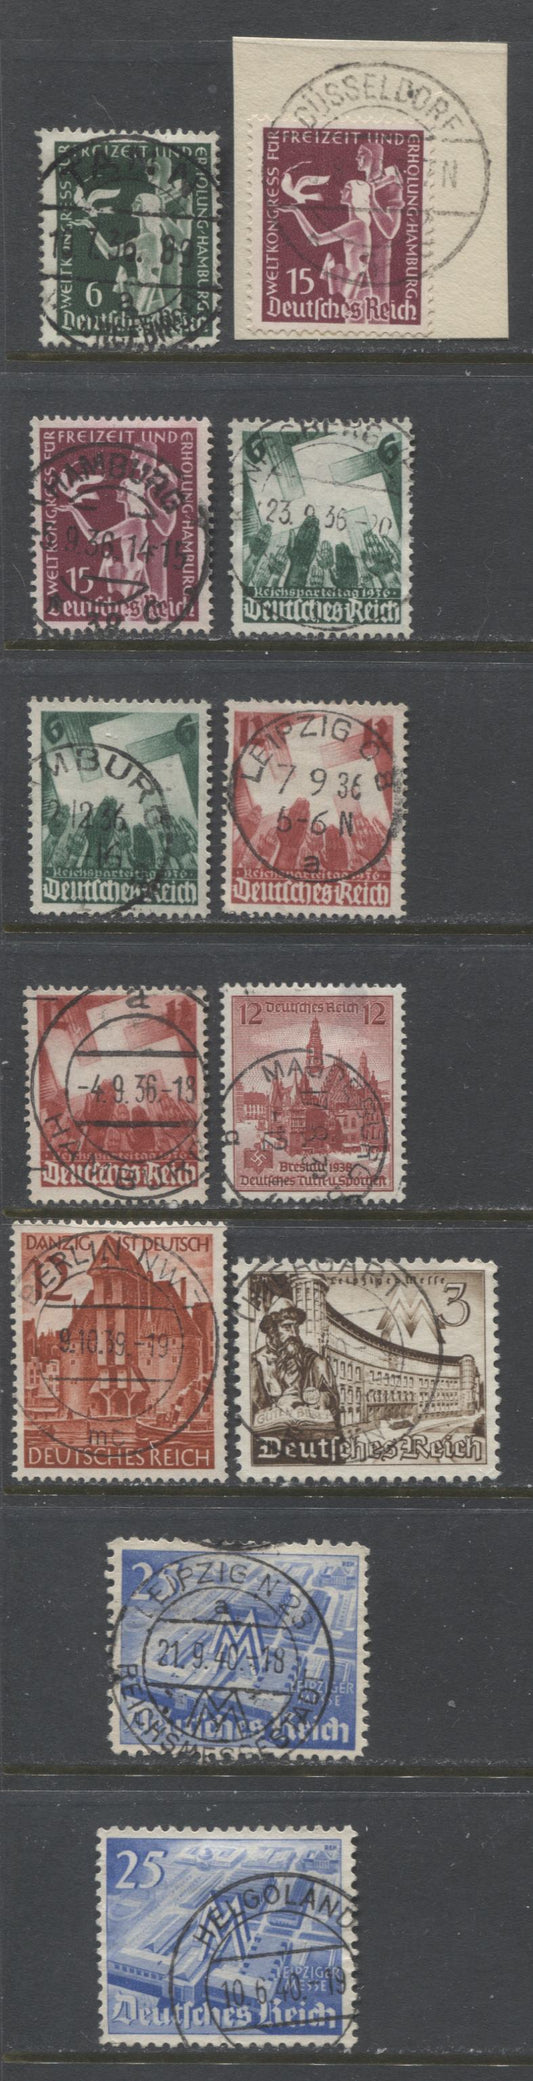 Lot 455 Germany SC#477/497 1936-1940 Vacation & Recreation Congress - Leipzig Fair Issues, All With SON Town Cancels, 12 VF Used Singles, Click on Listing to See ALL Pictures, Estimated Value $10